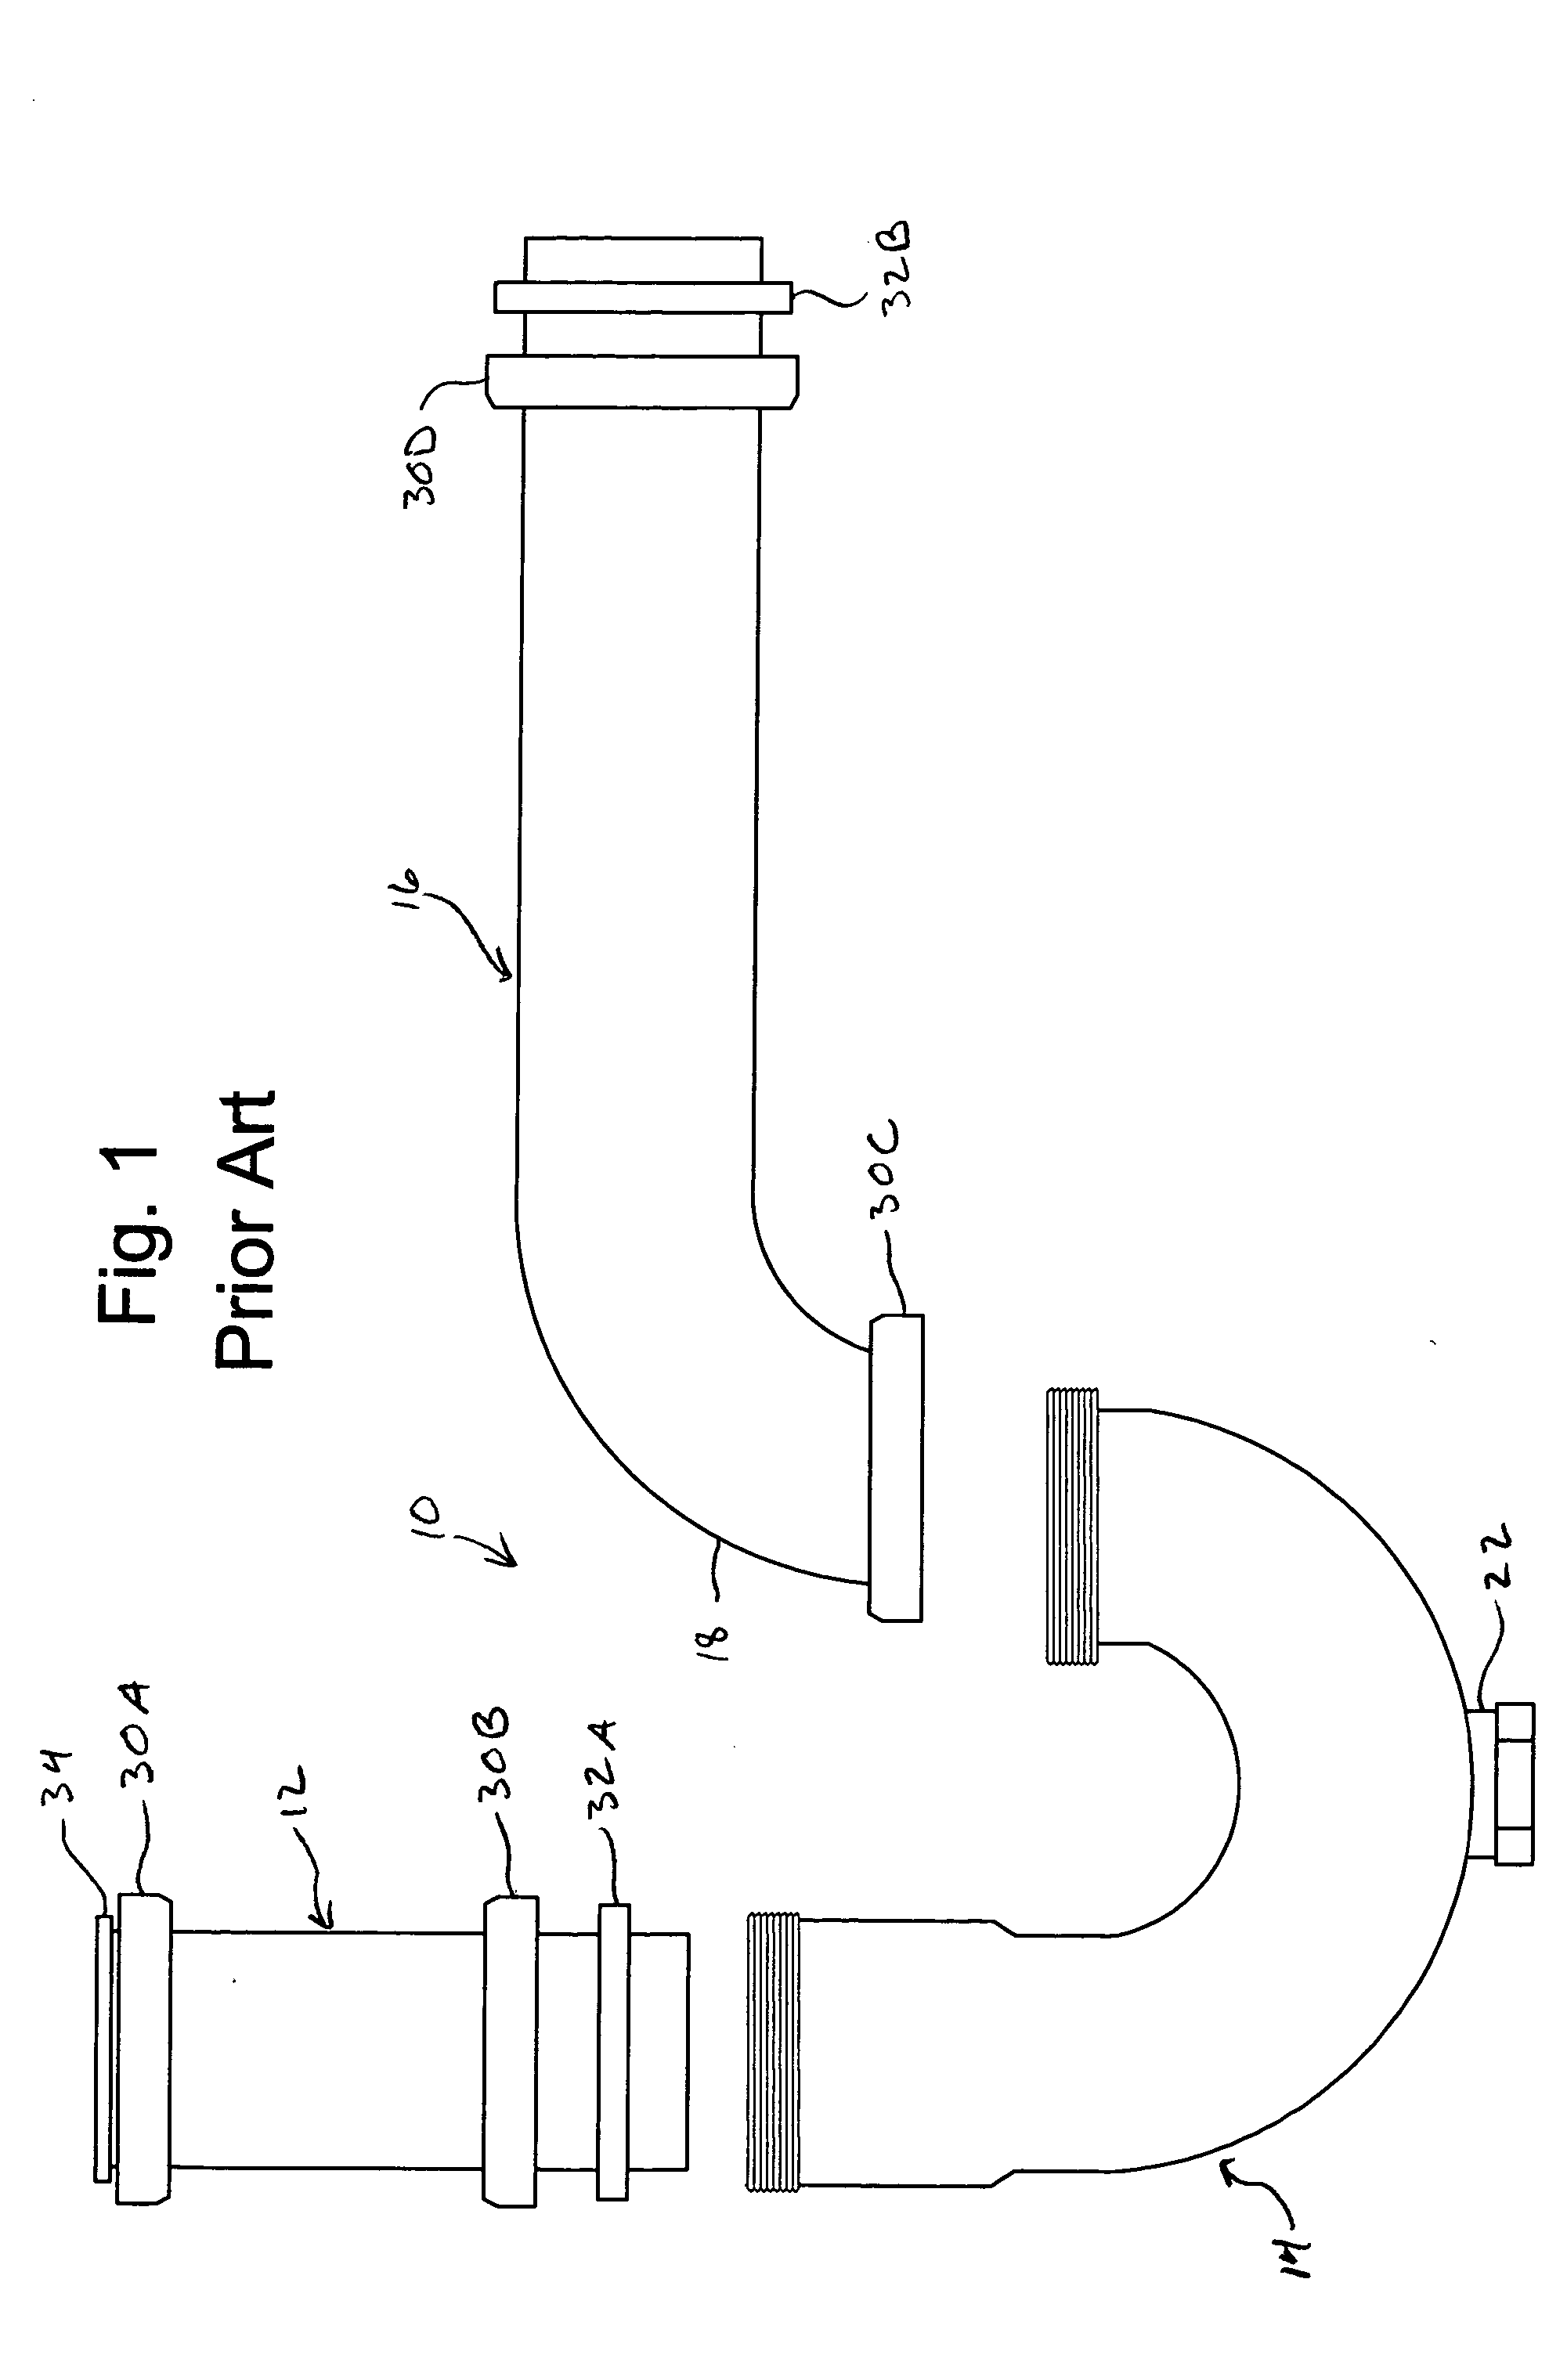 Flexible and extendable plumbing trap device